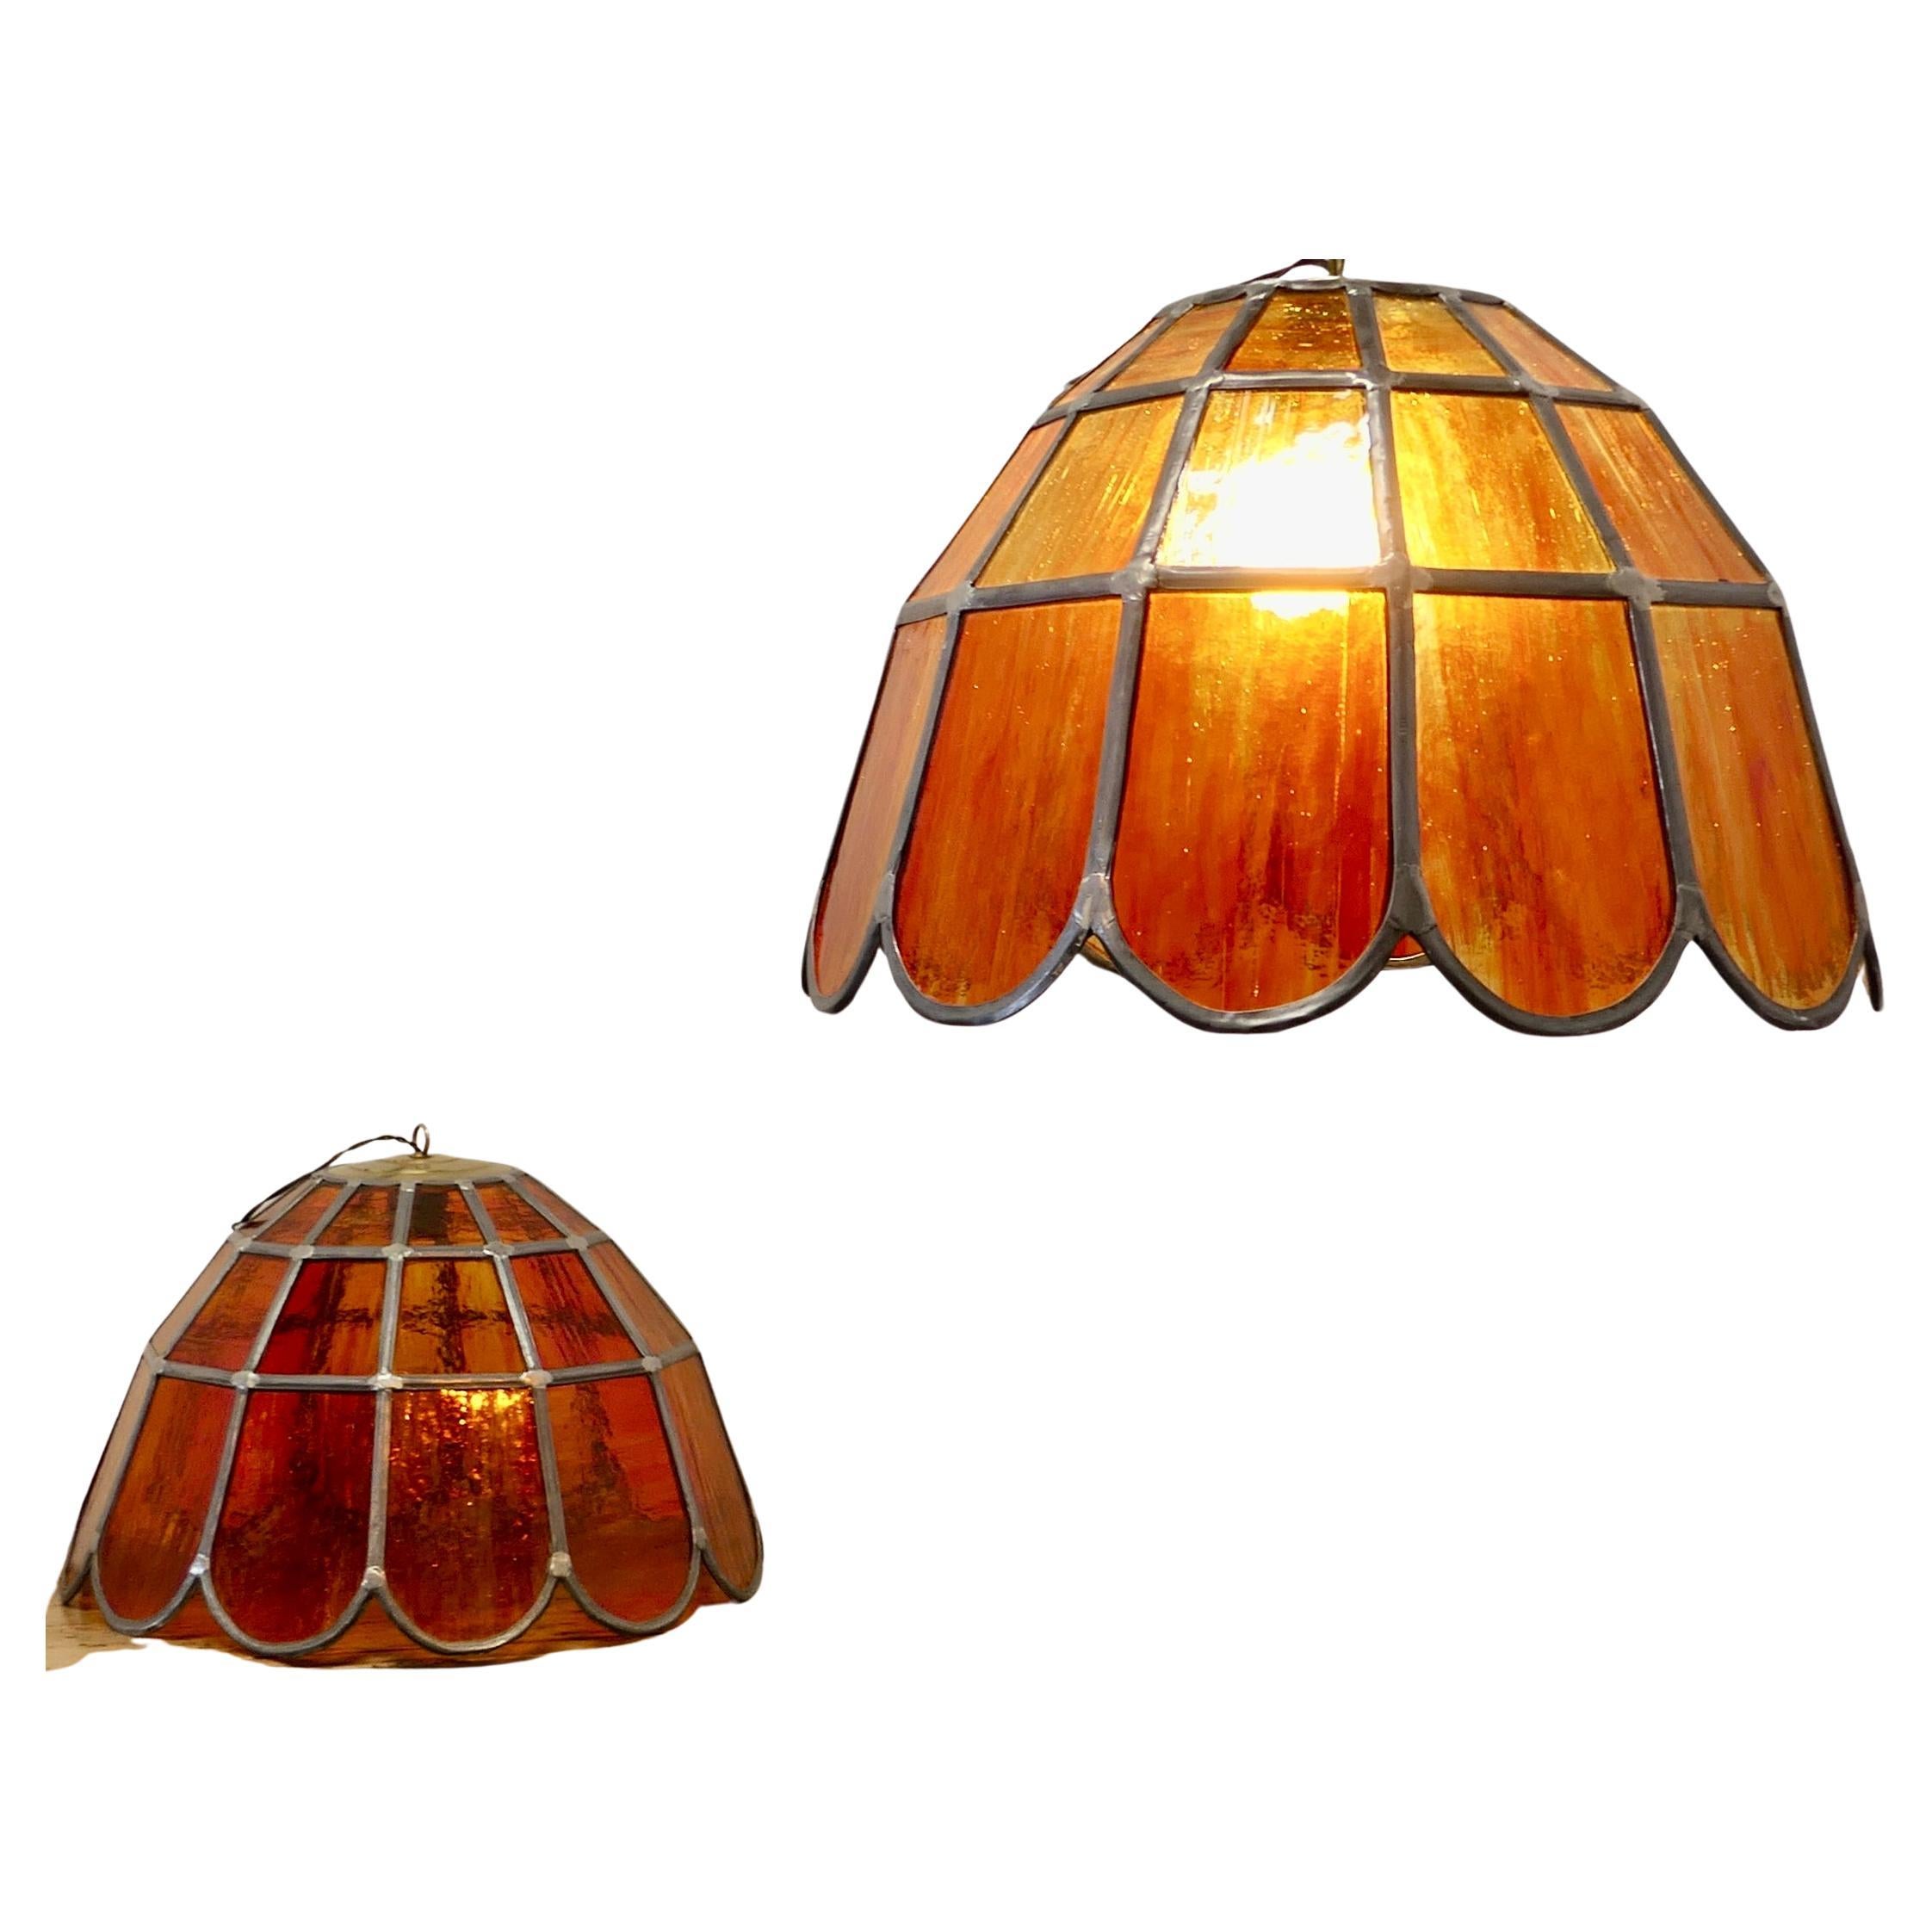  Pair of Large Arts and Crafts Amber Leaded Glass Pendant Lights    For Sale